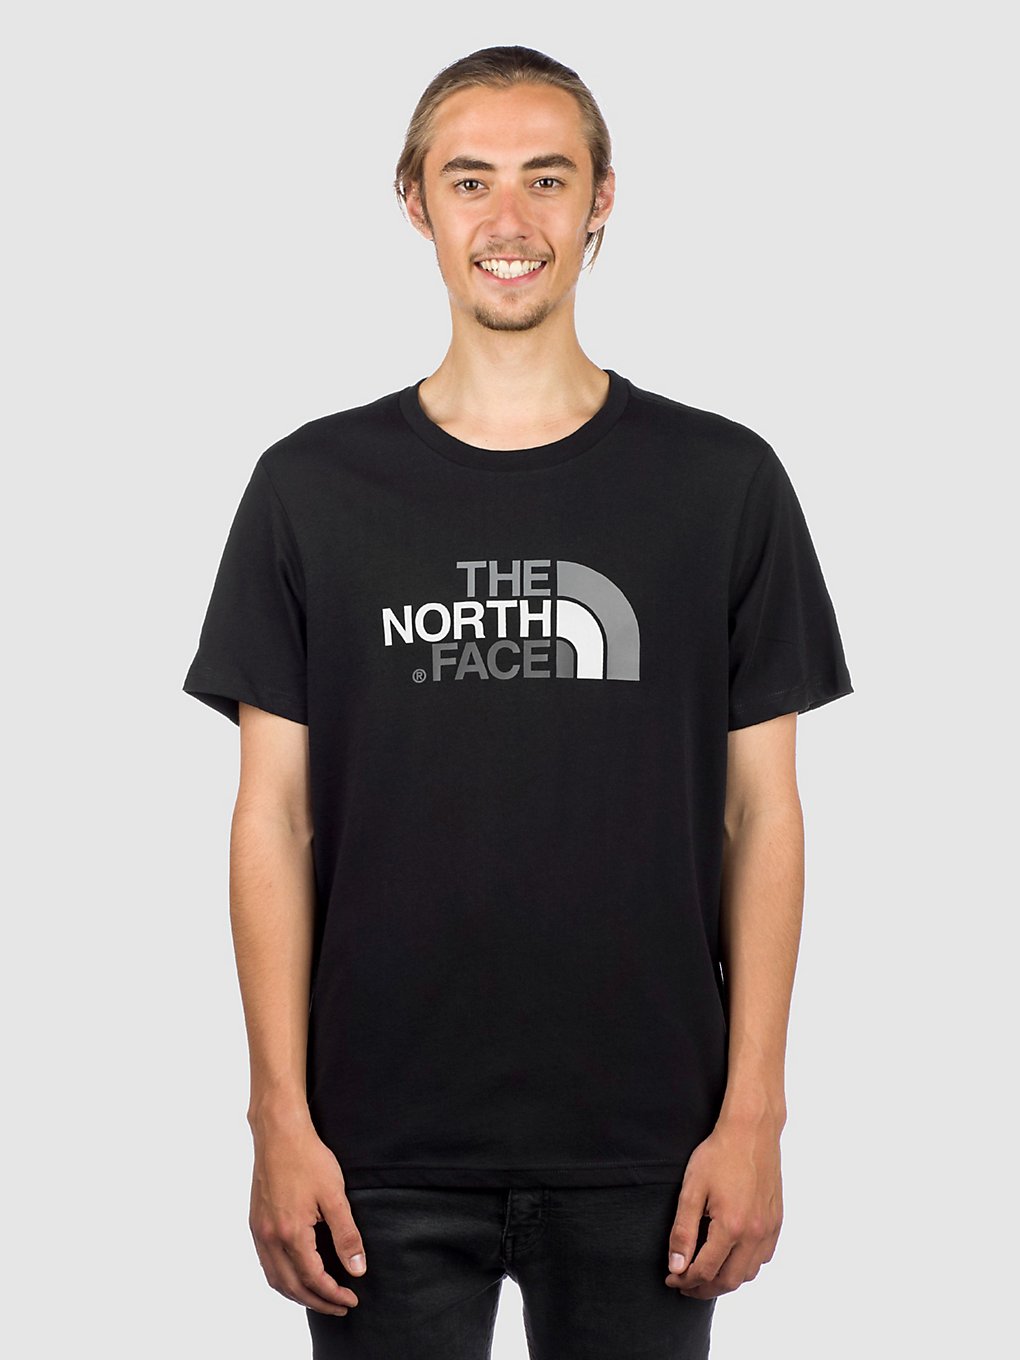 THE NORTH FACE Easy T-Shirt tnf black kaufen